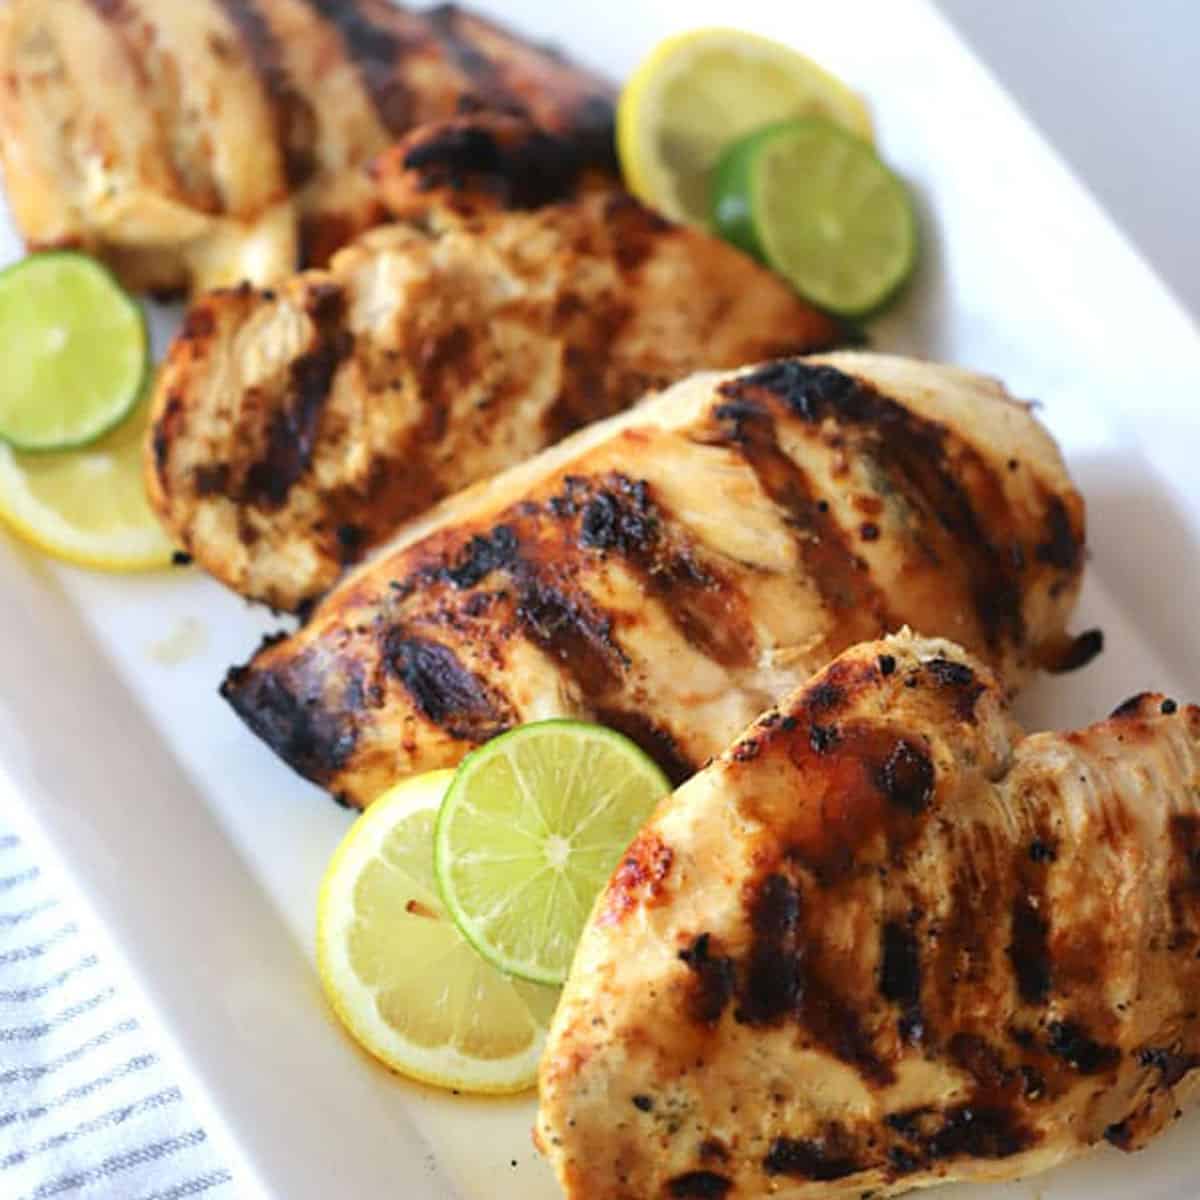 citrus chicken marinade is divine! There's tons of flavor and the chicken is so moist. It's the perfect marinade for any grill night!